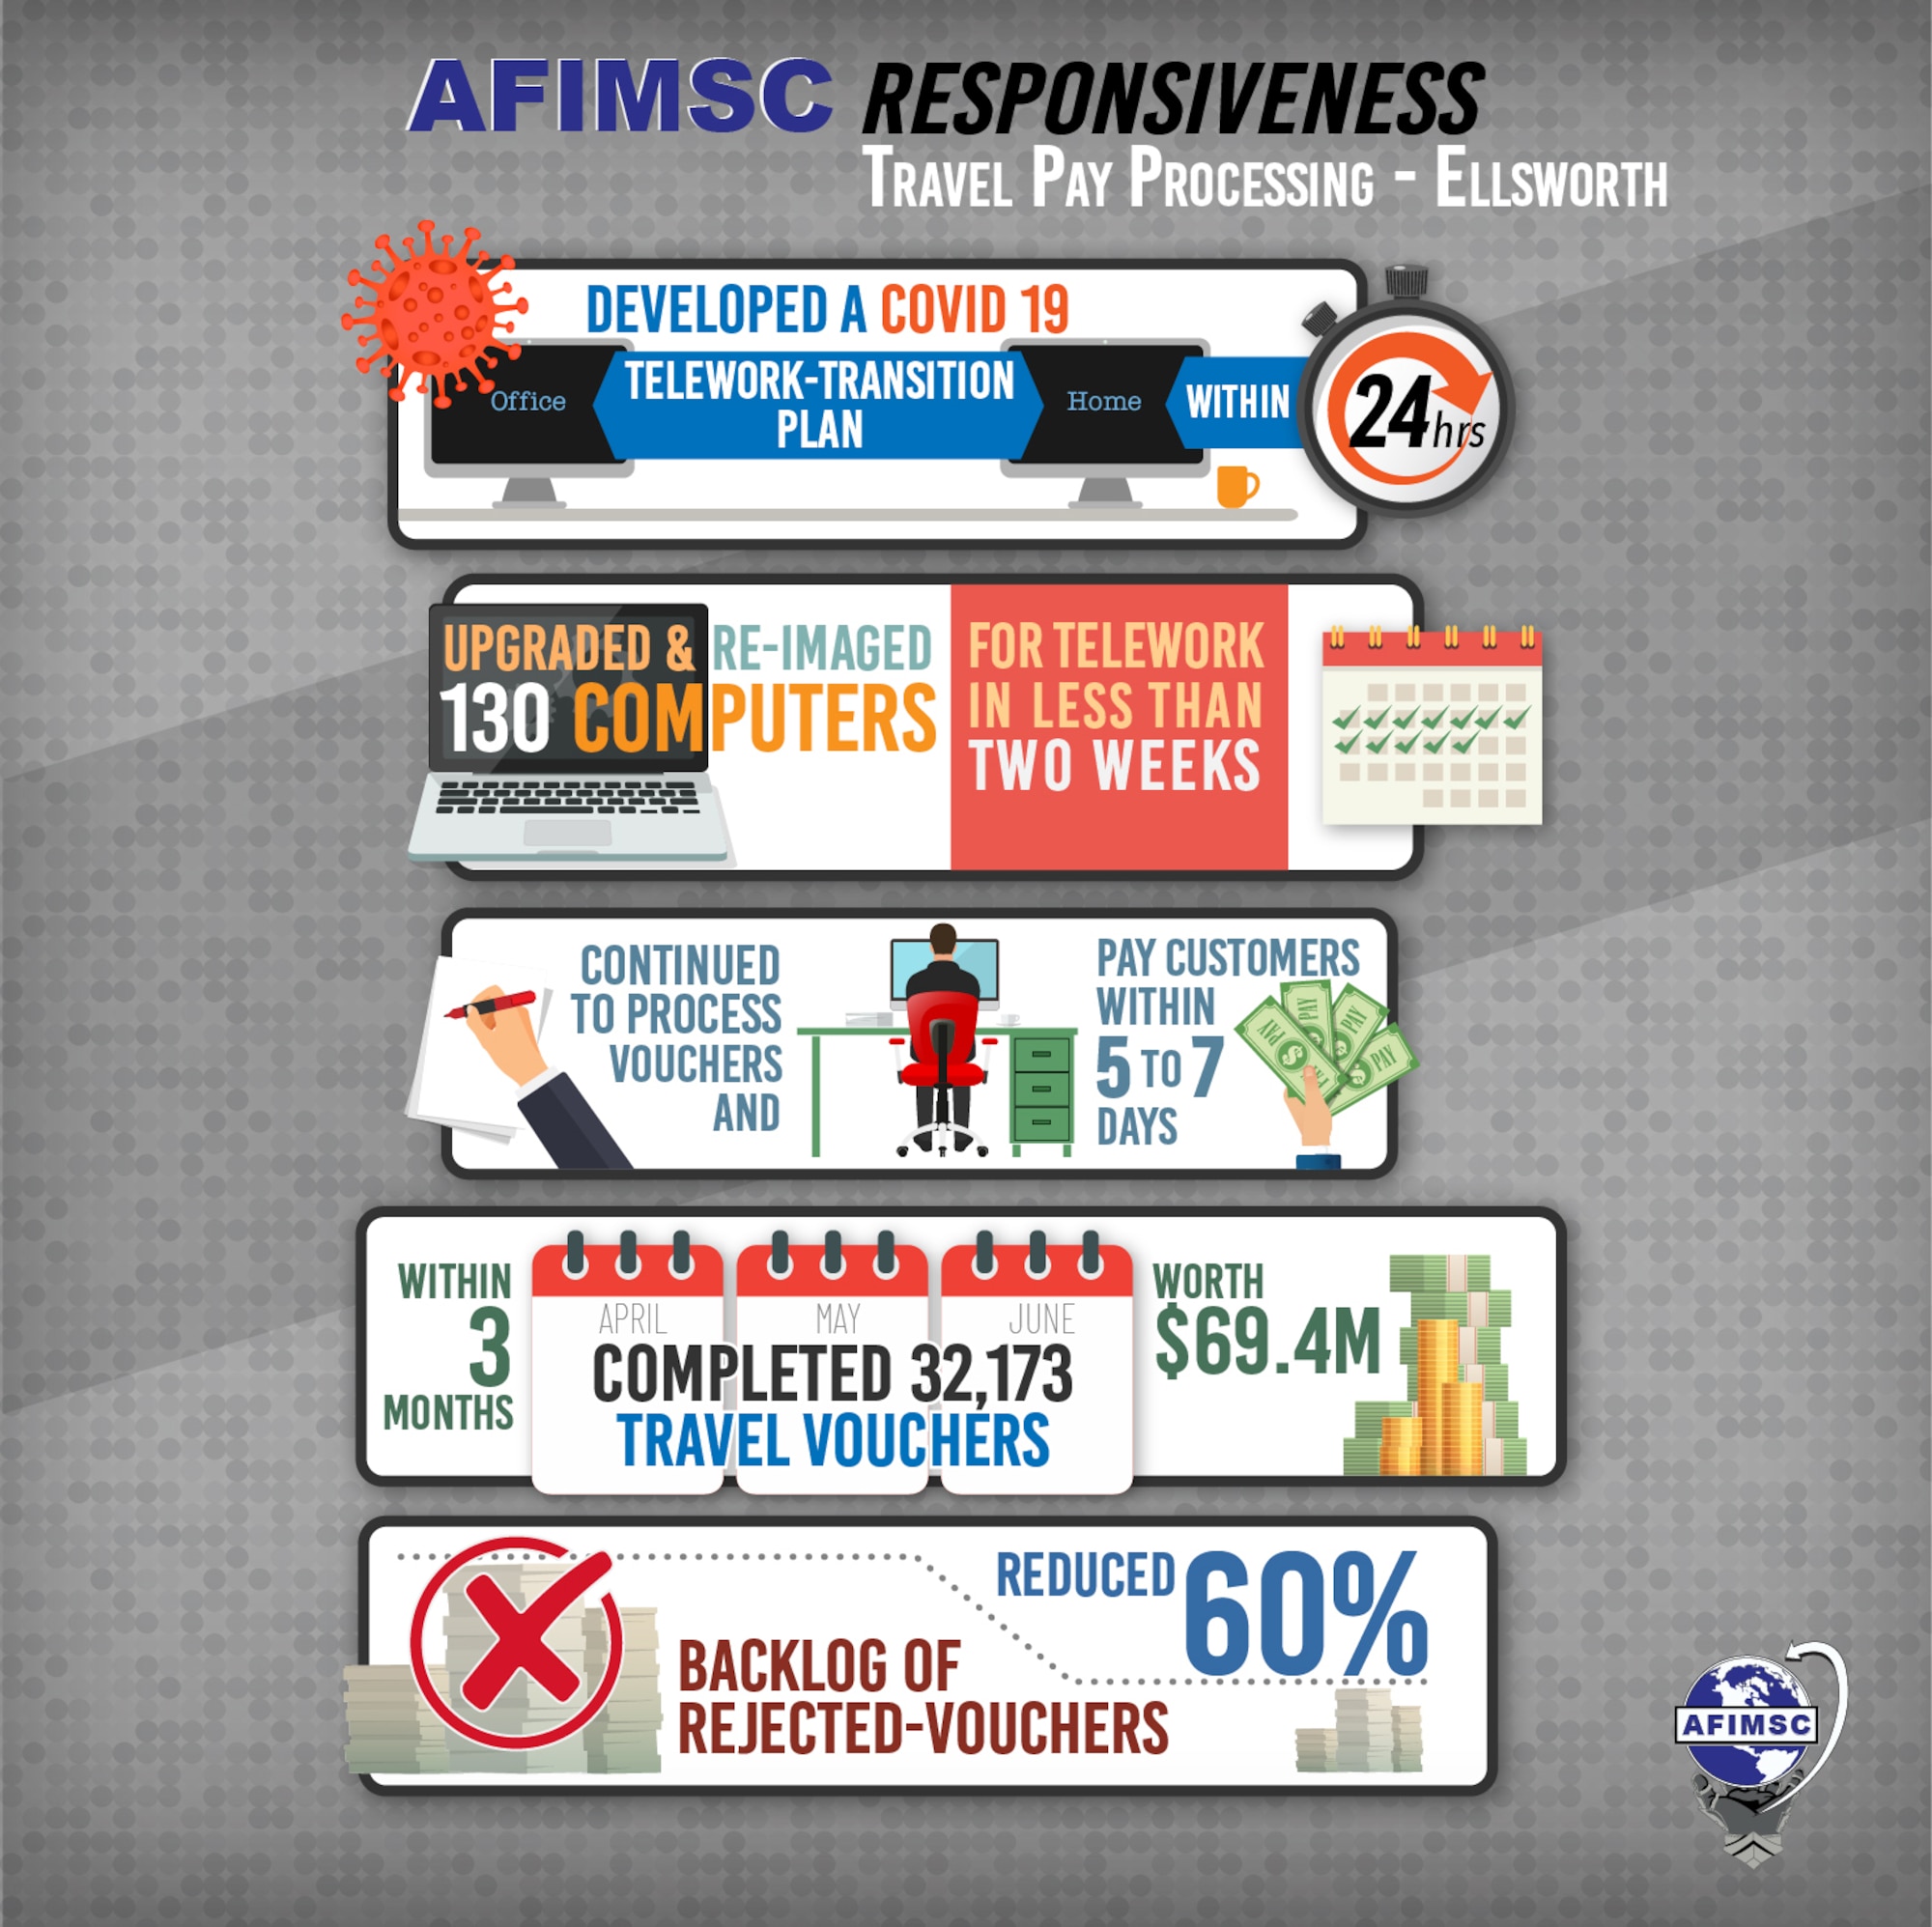 AFIMSC travel pay team adapts to respond to customer needs > Hill